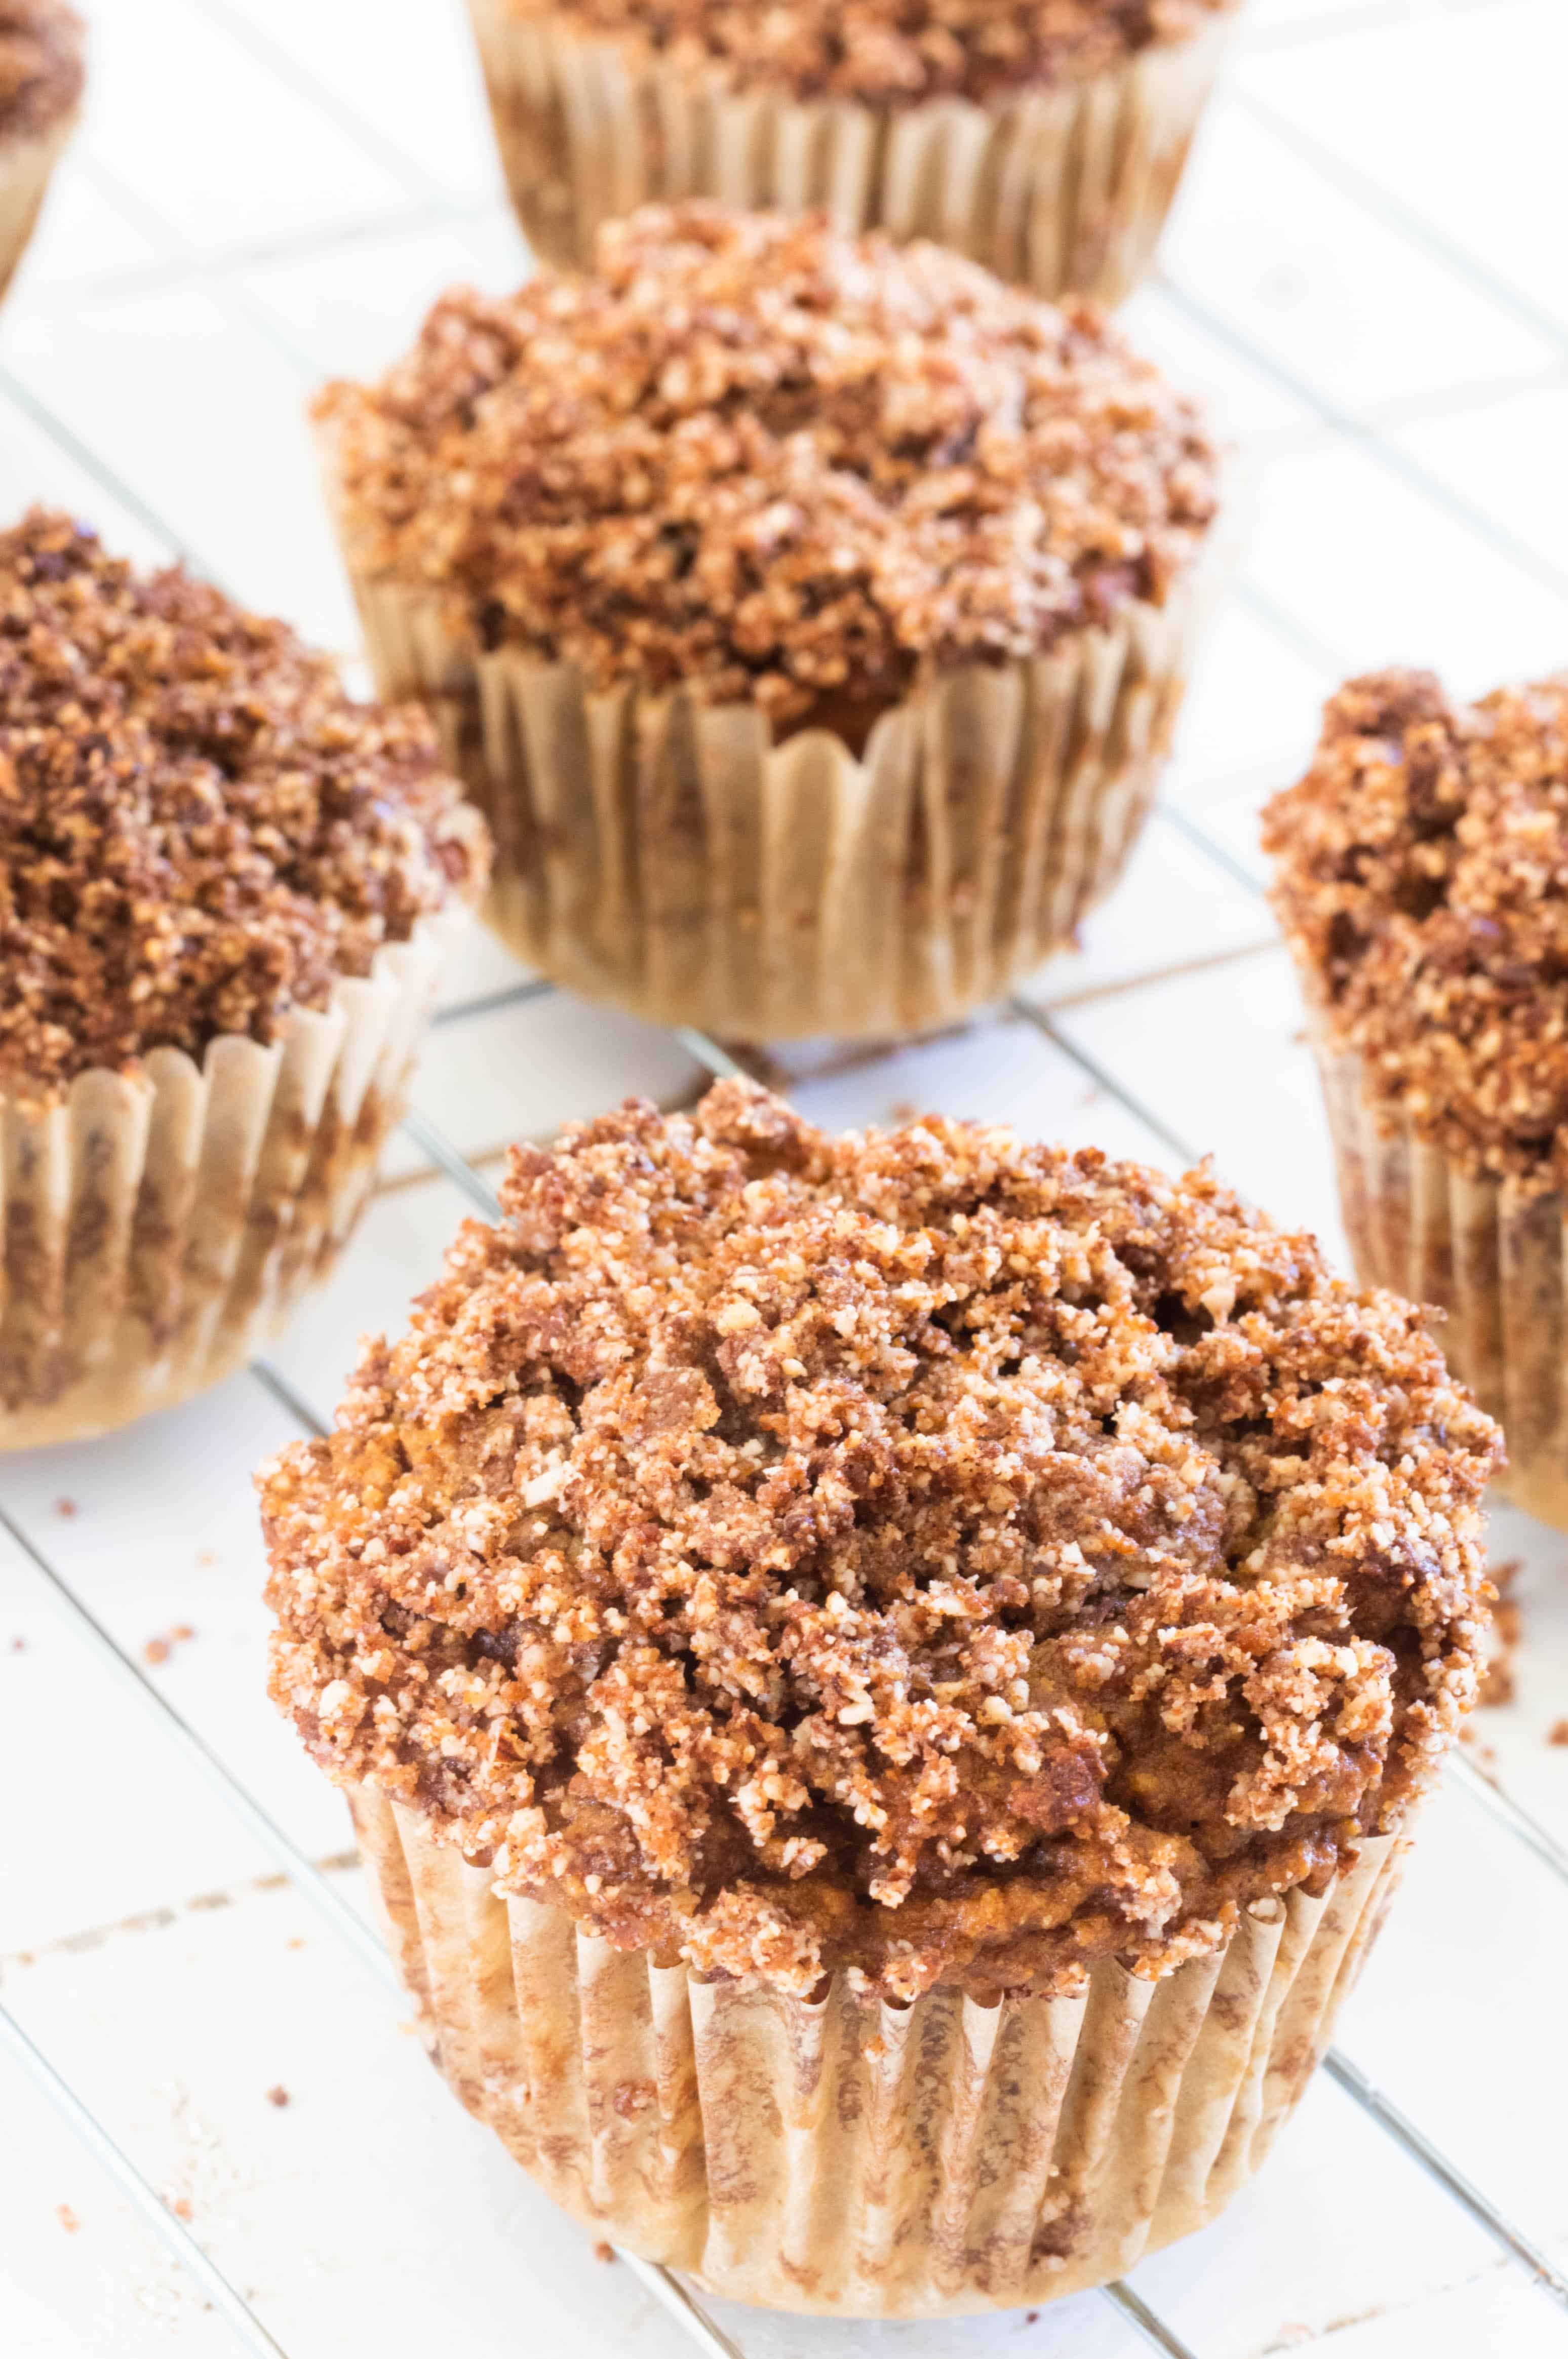 Pumpkin muffins with crumble topping on cooling wire rack.